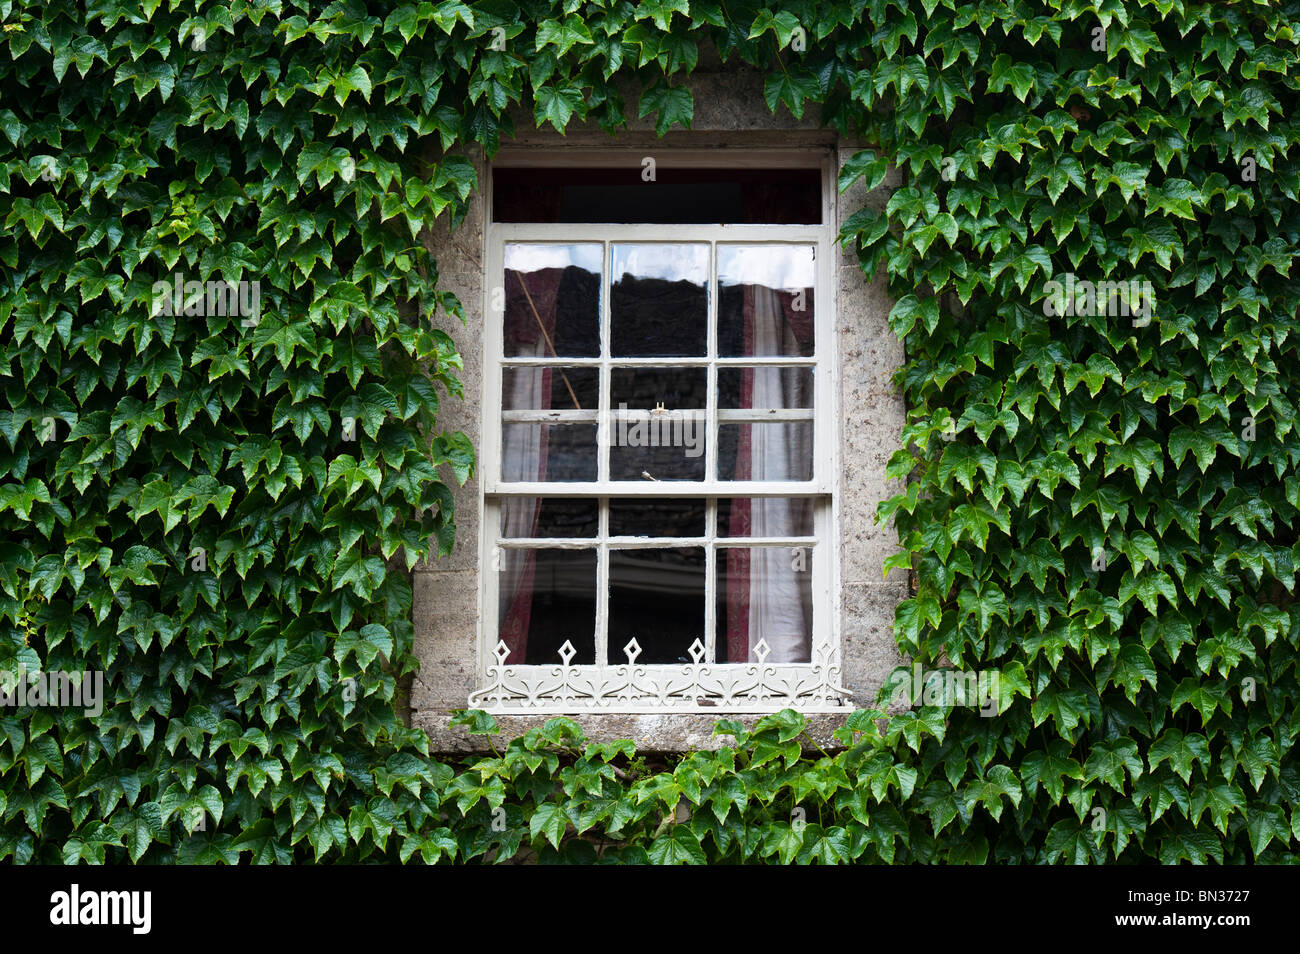 Parthenocissus tricuspidata. Boston ivy / Japanese creeper covering the wall of a house surrounding an old wooden sash window. Cotswolds, UK. Stock Photo